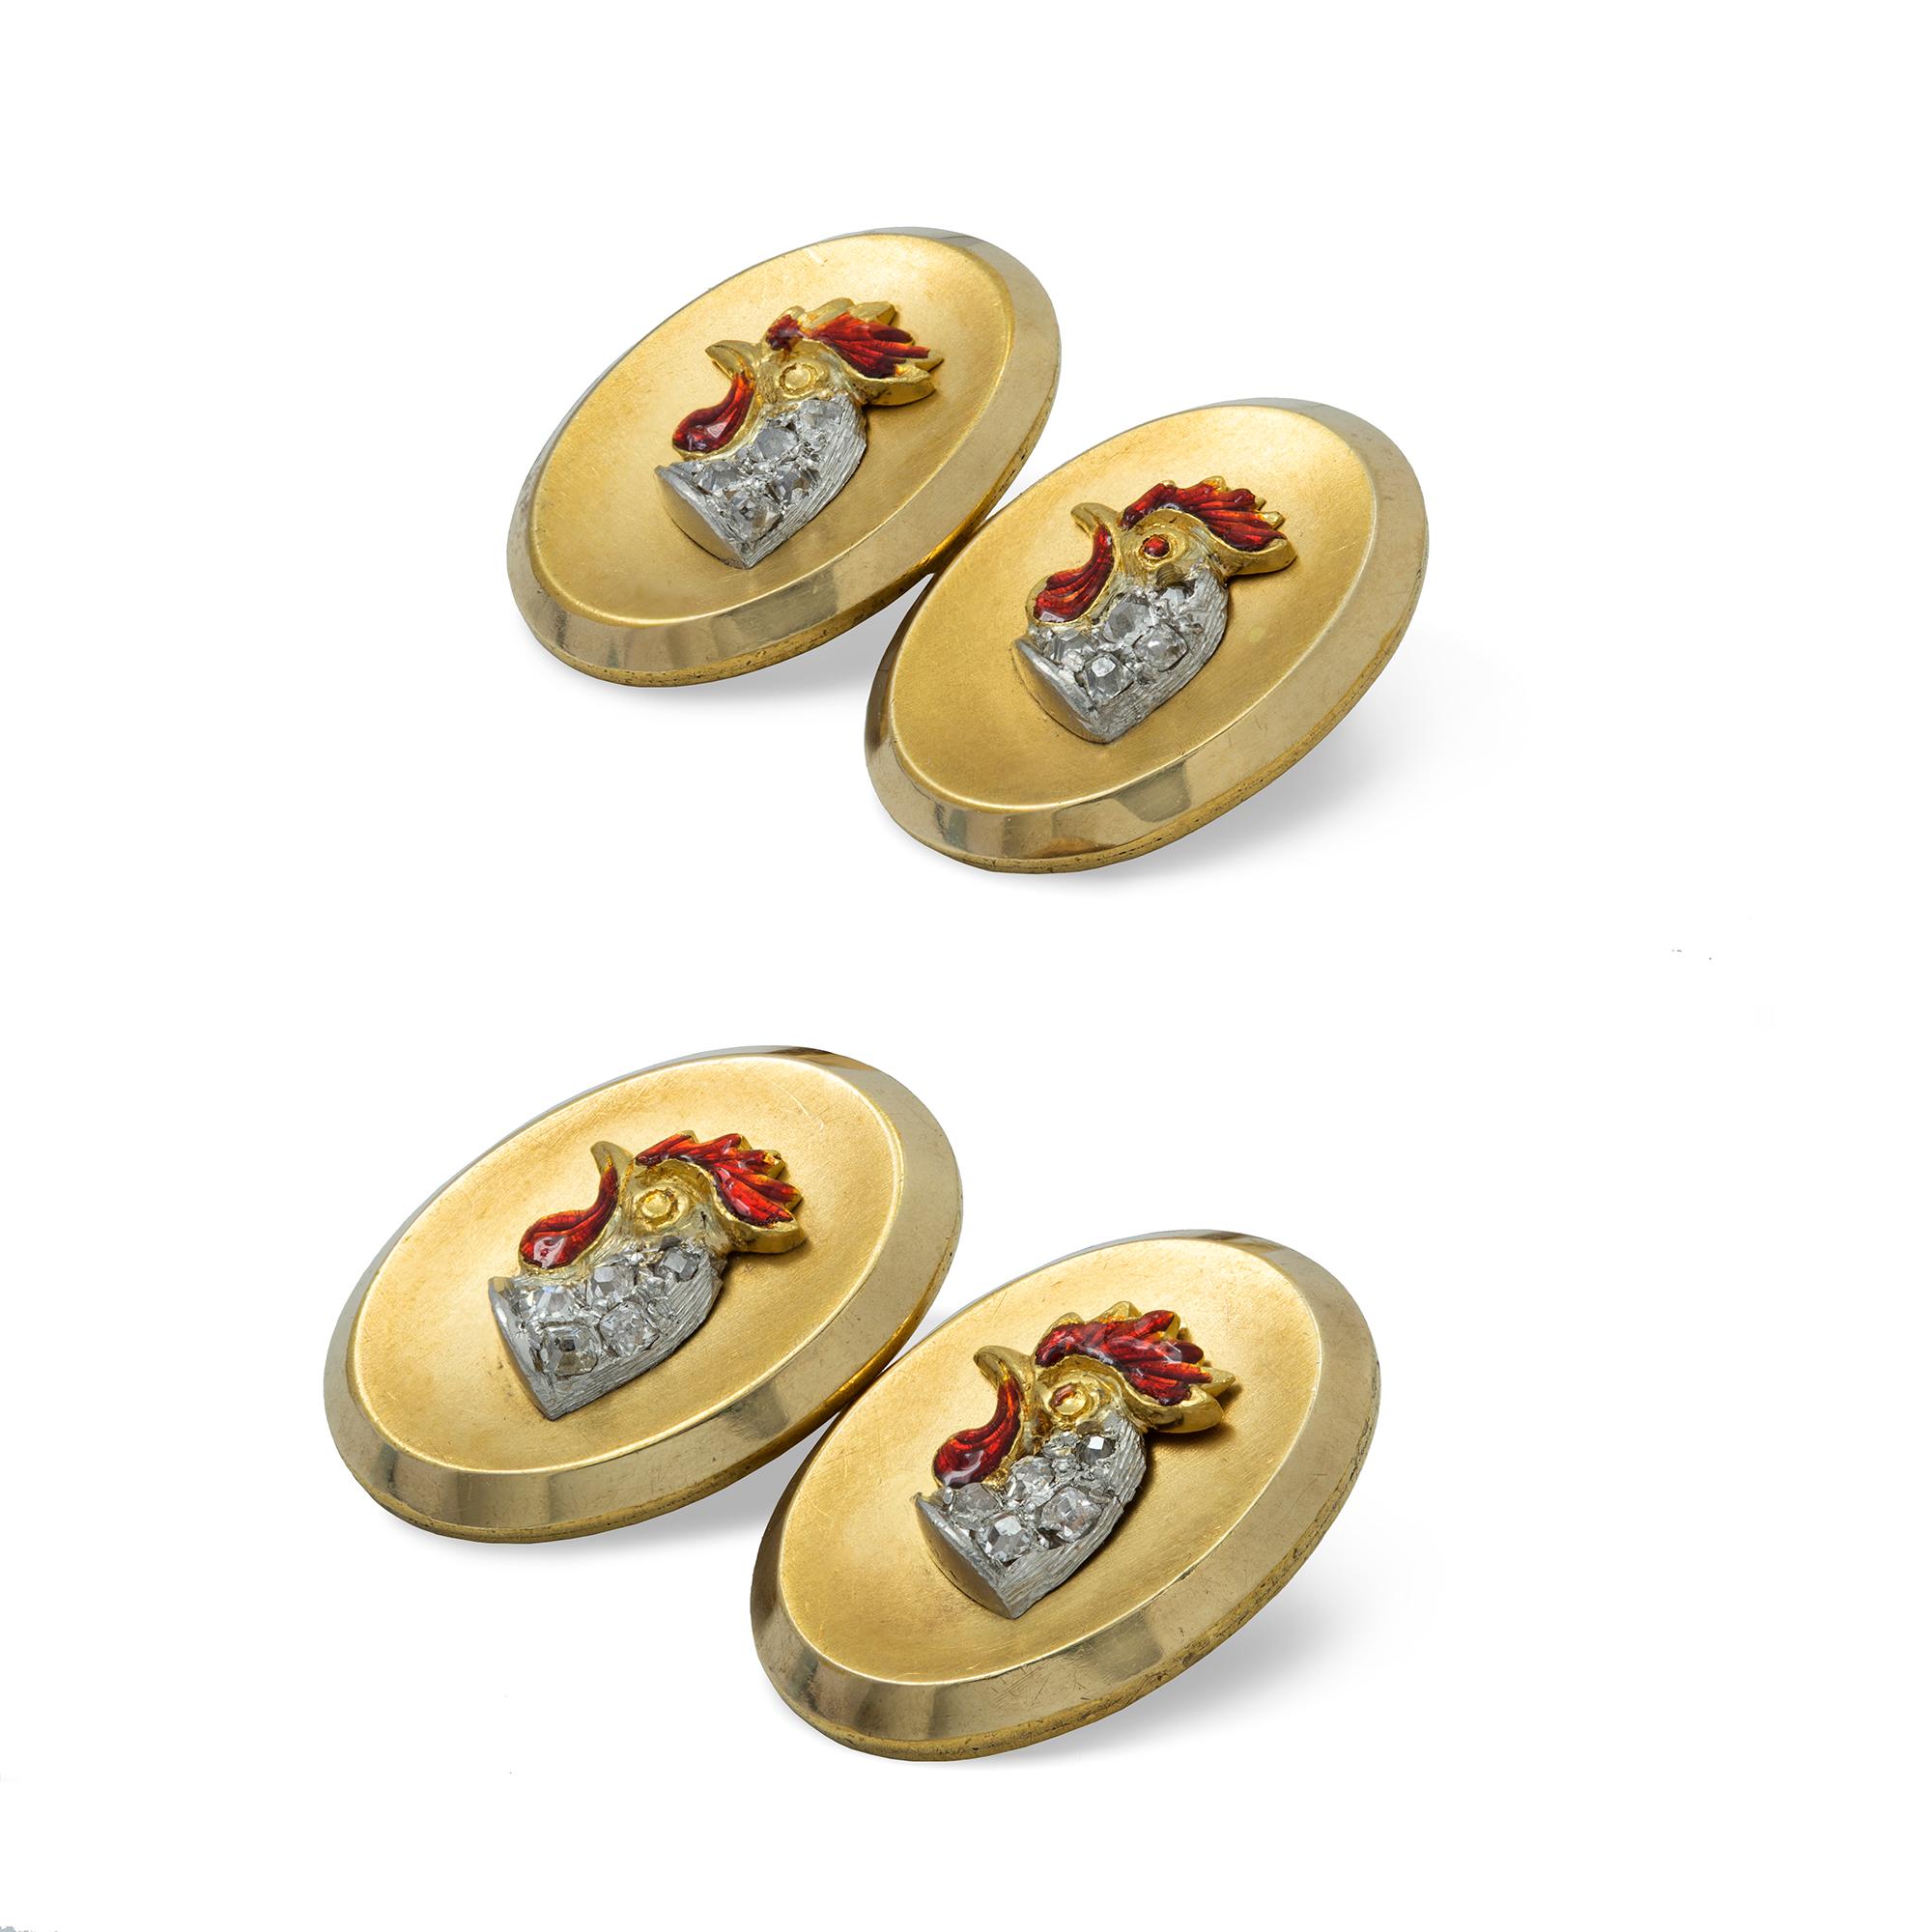 A pair of late Victorian rooster cufflinks, the oval links bearing the red enamelled and diamond-set head of a rooster, with bar-link connections, circa 1900, measuring approximately 18 x 14mm each, gross weight 23.1 grams.
Should you choose to make